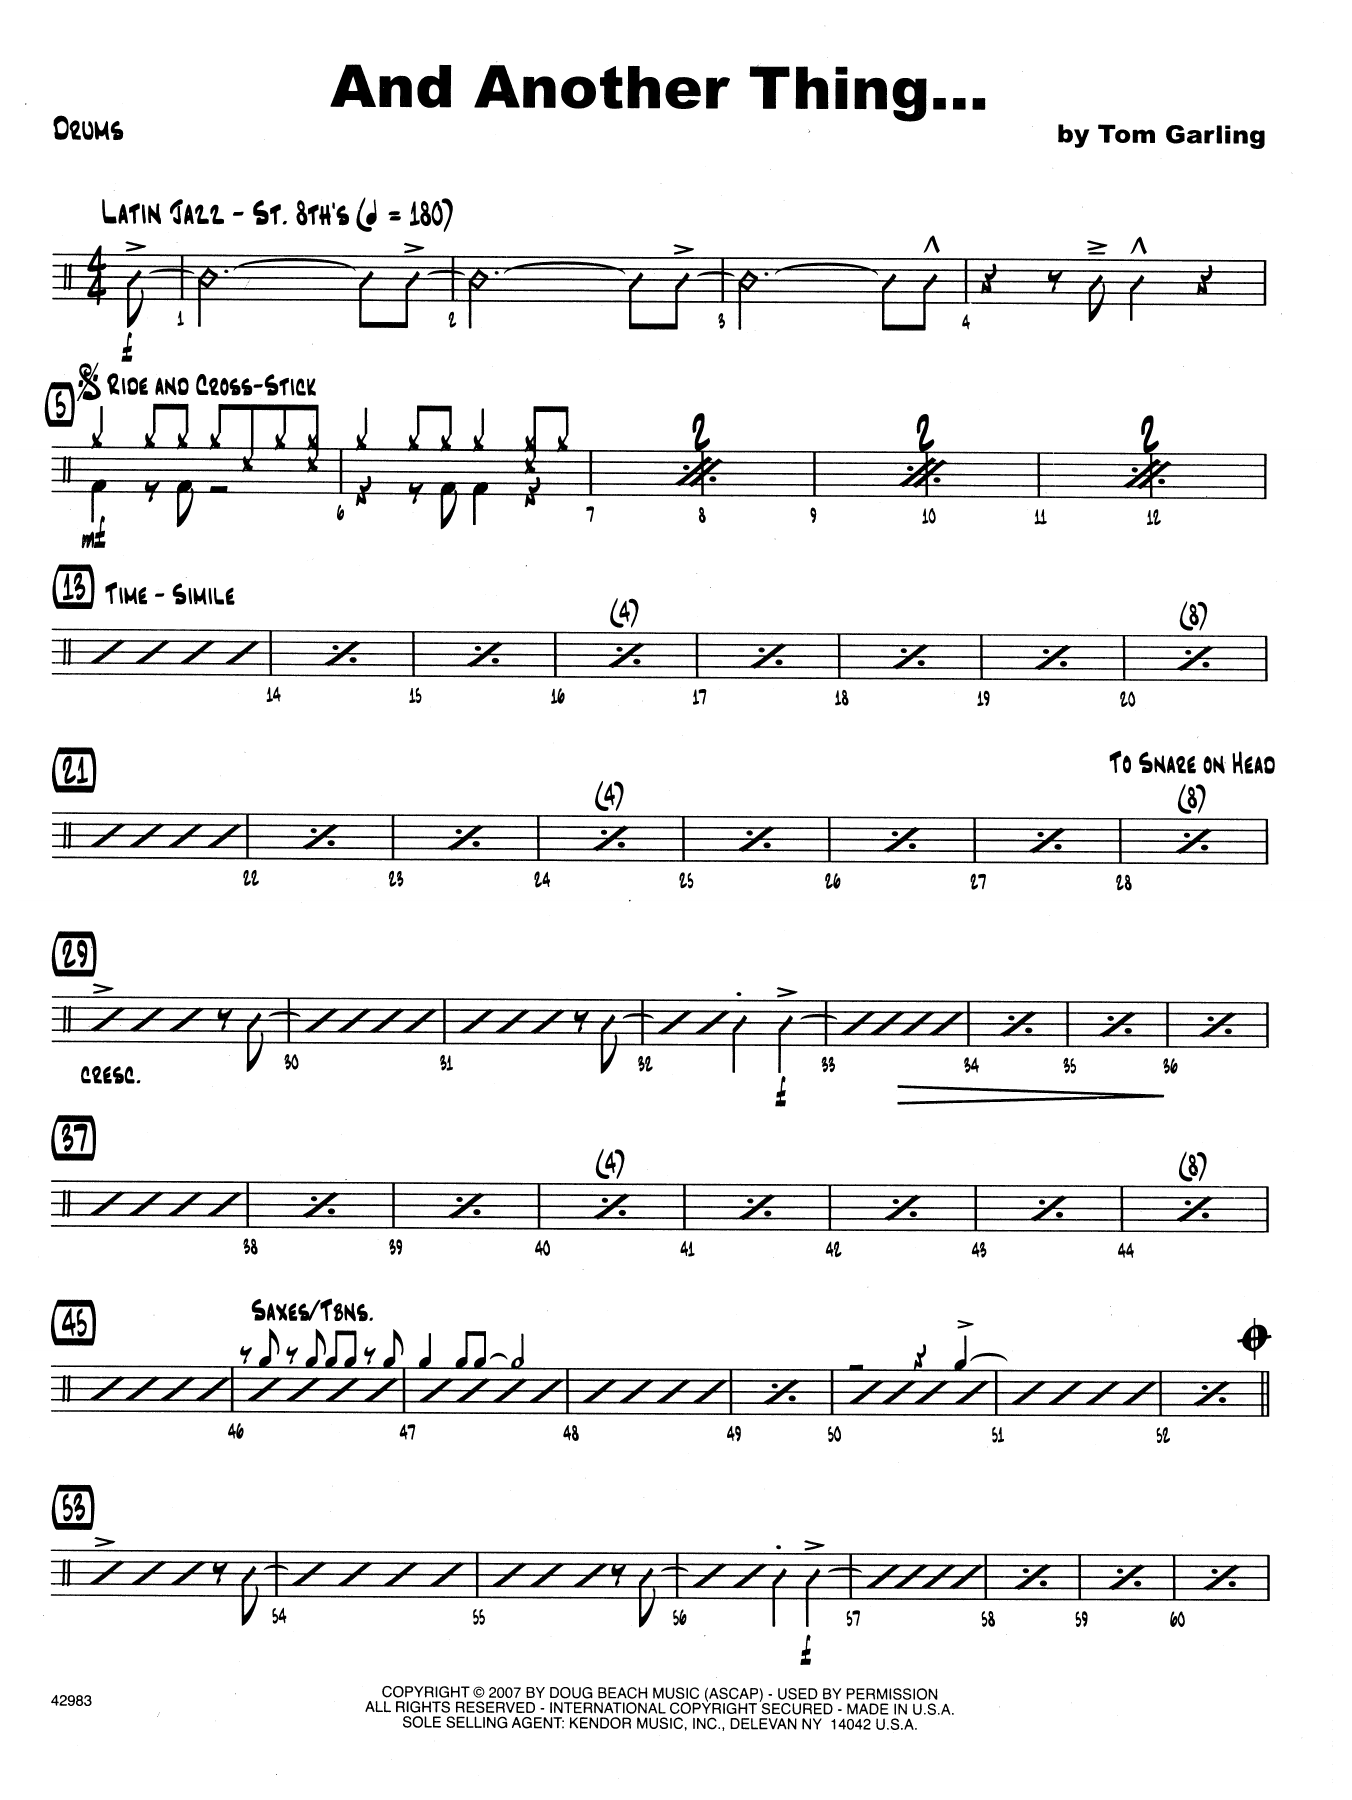 Download Tom Garling And Another Thing - Drum Set Sheet Music